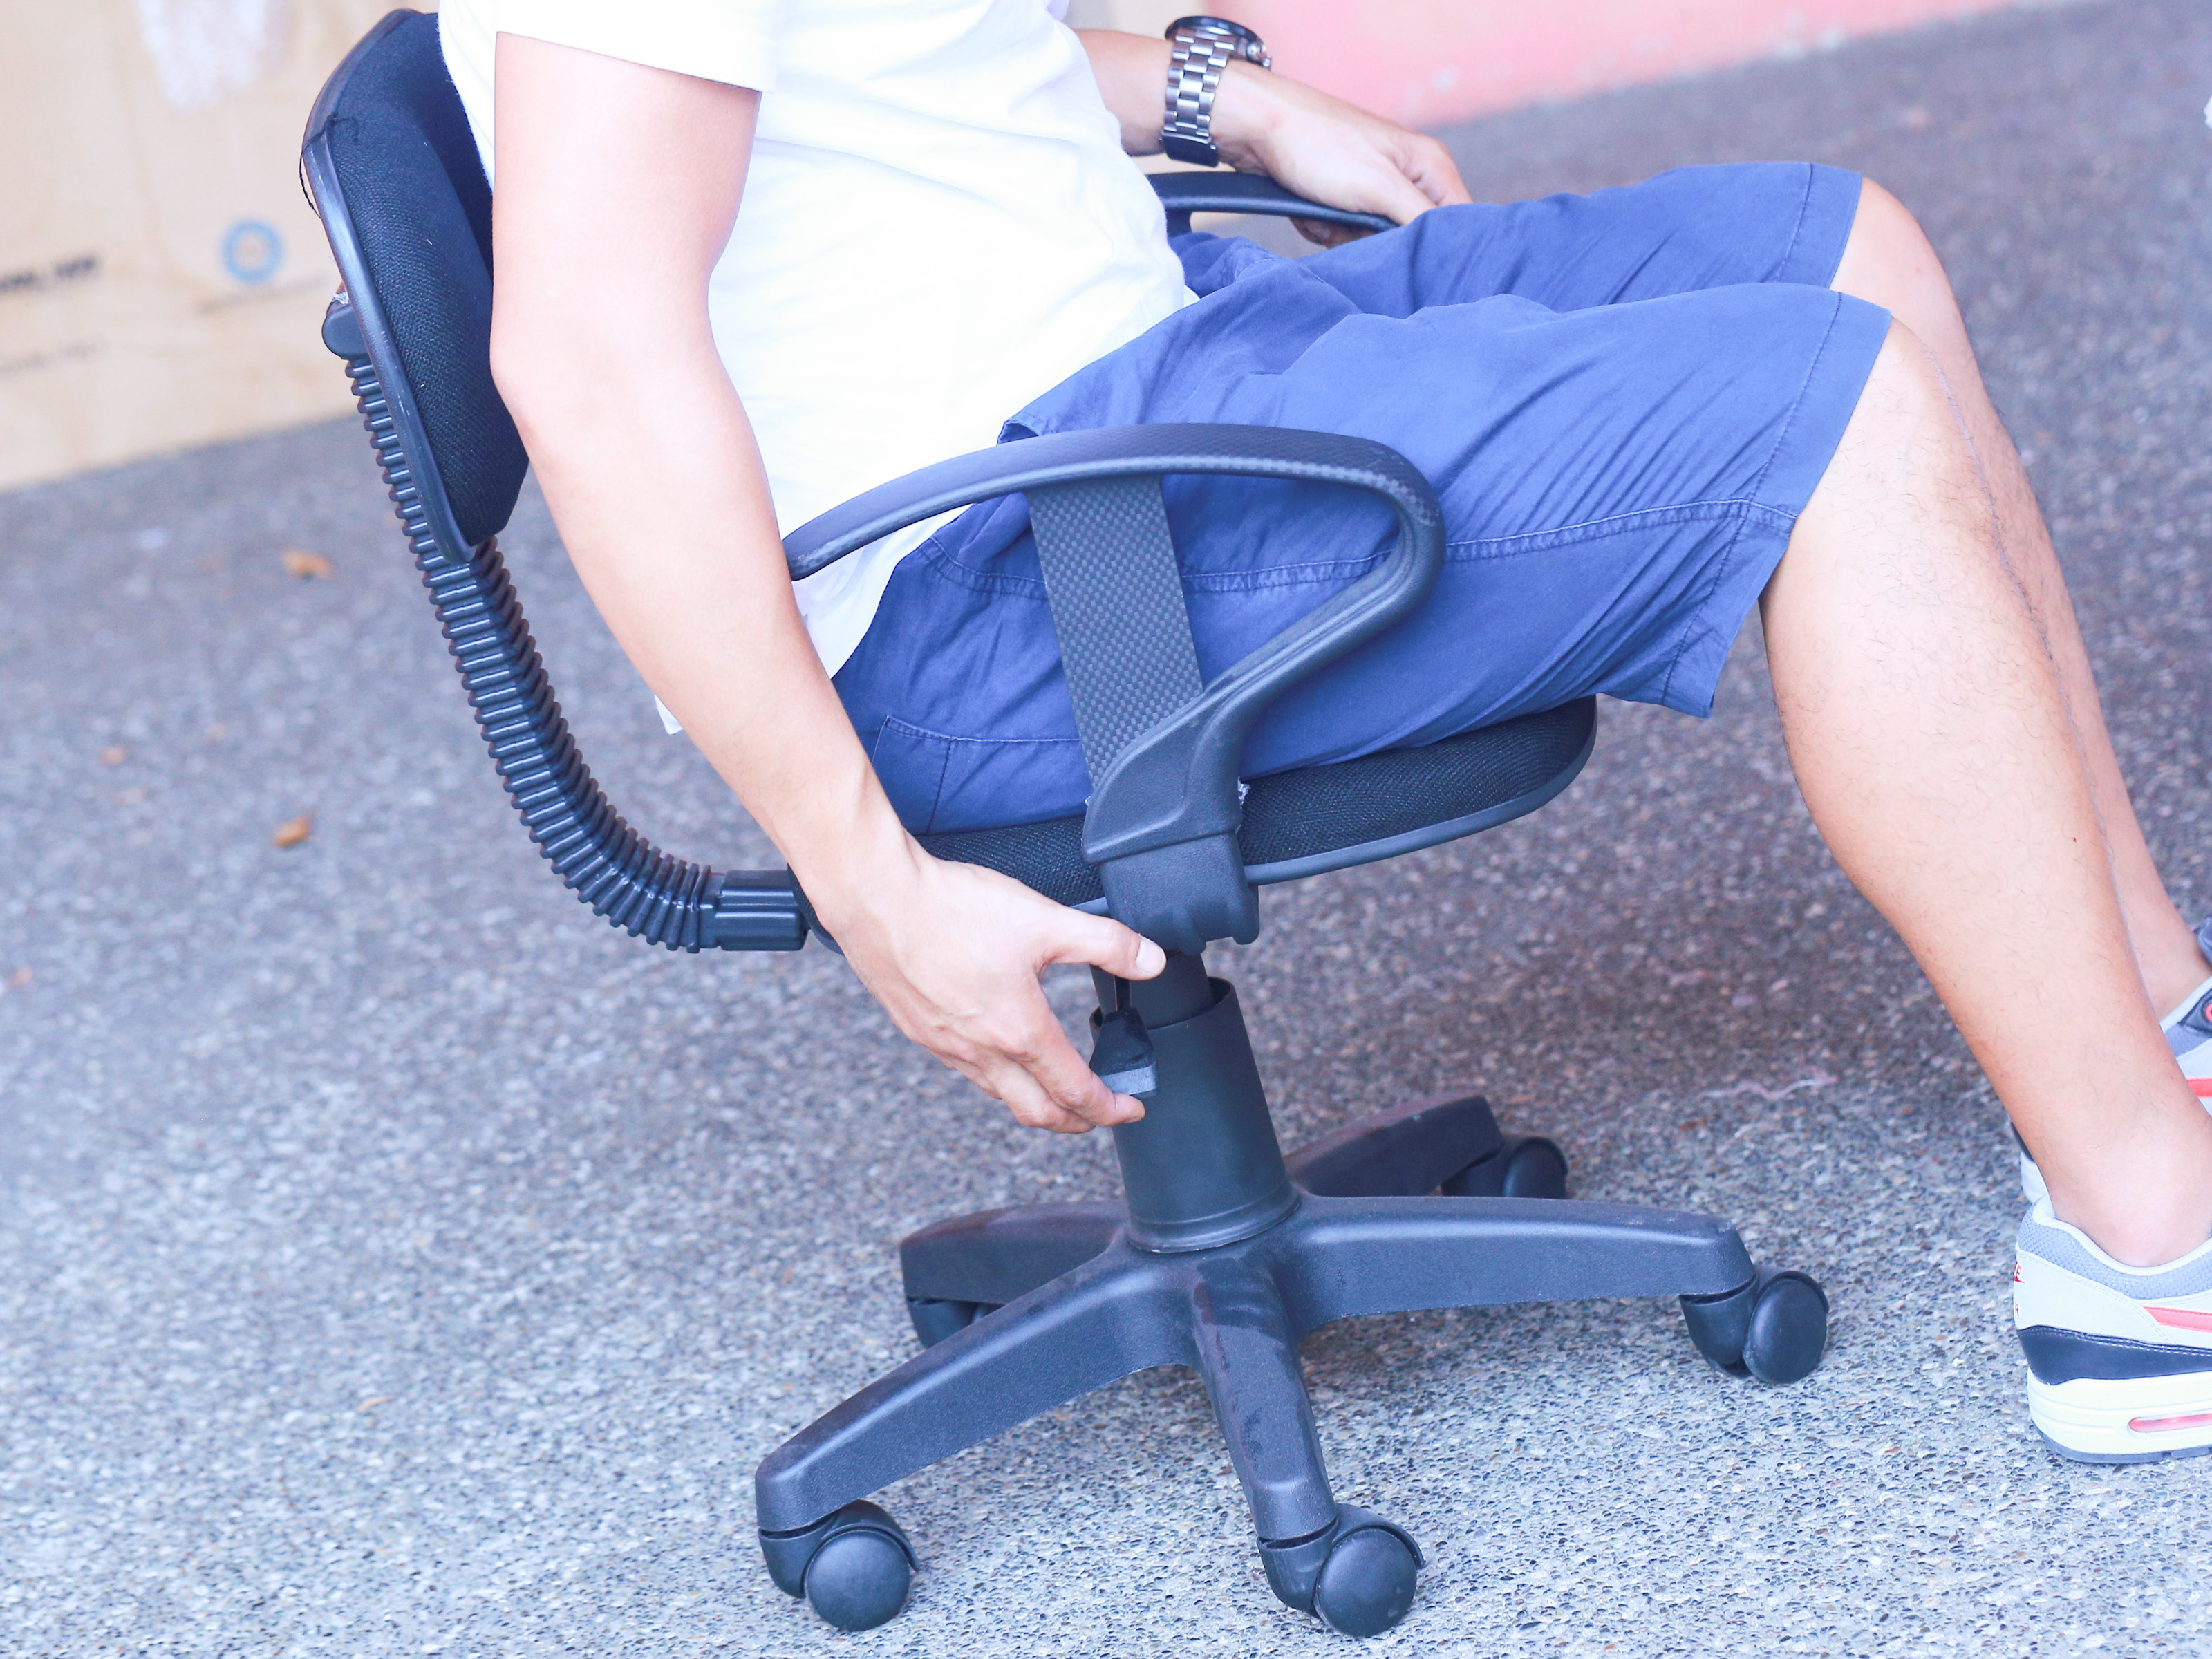 squeaky office chair